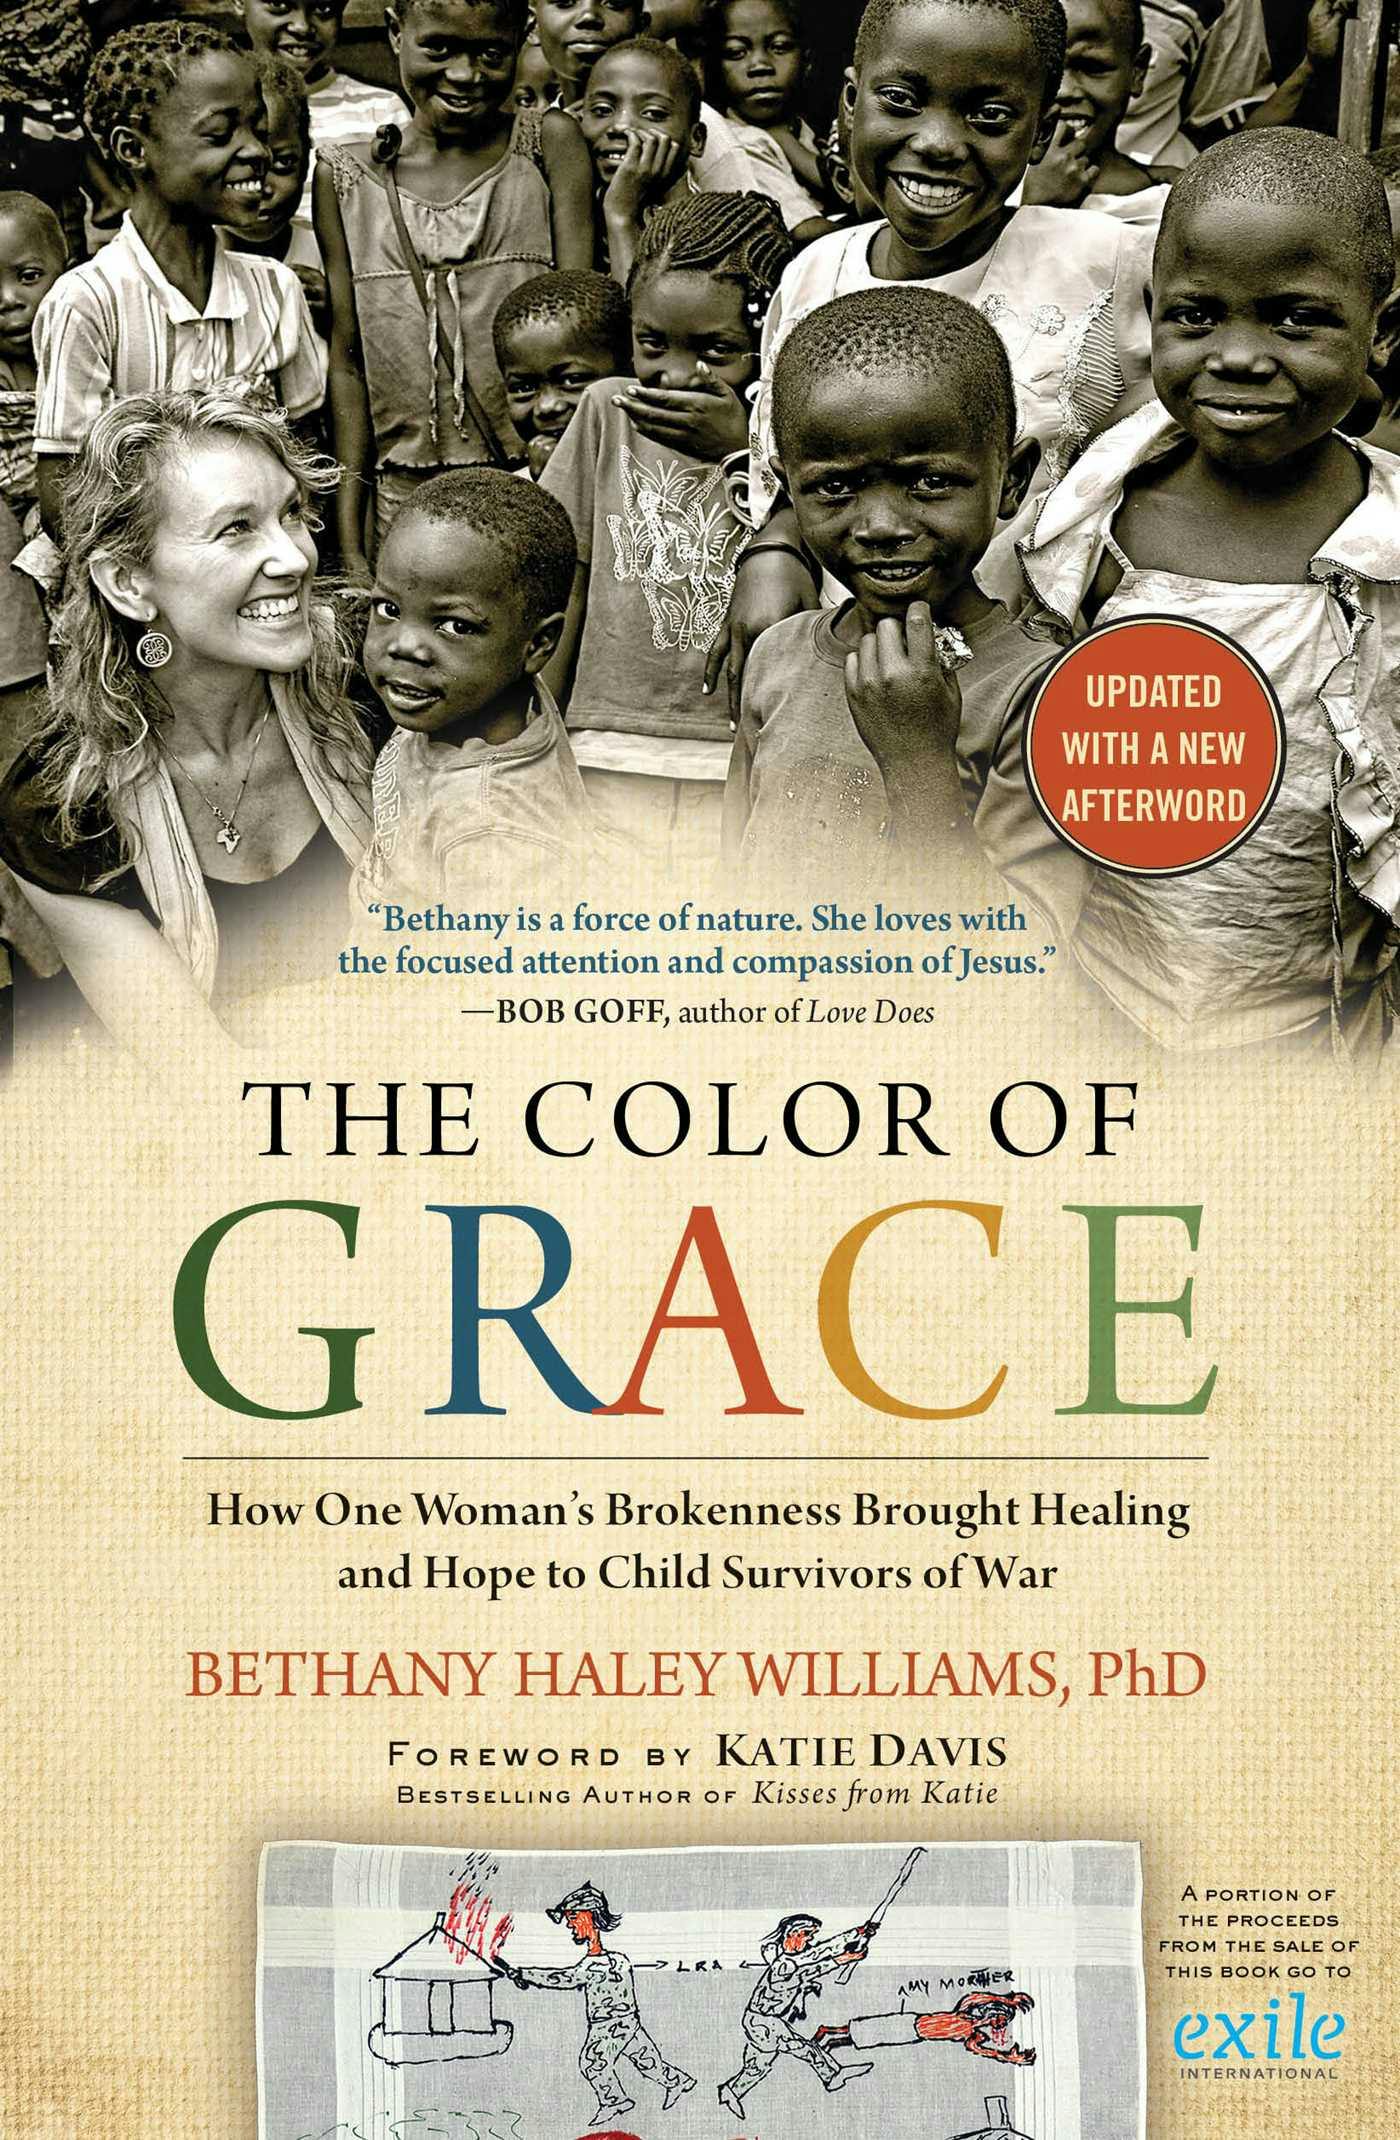 The Color of Grace: How One Woman's Brokenness Brought Healing and Hope to Child Survivors of War - Bethany Haley Williams